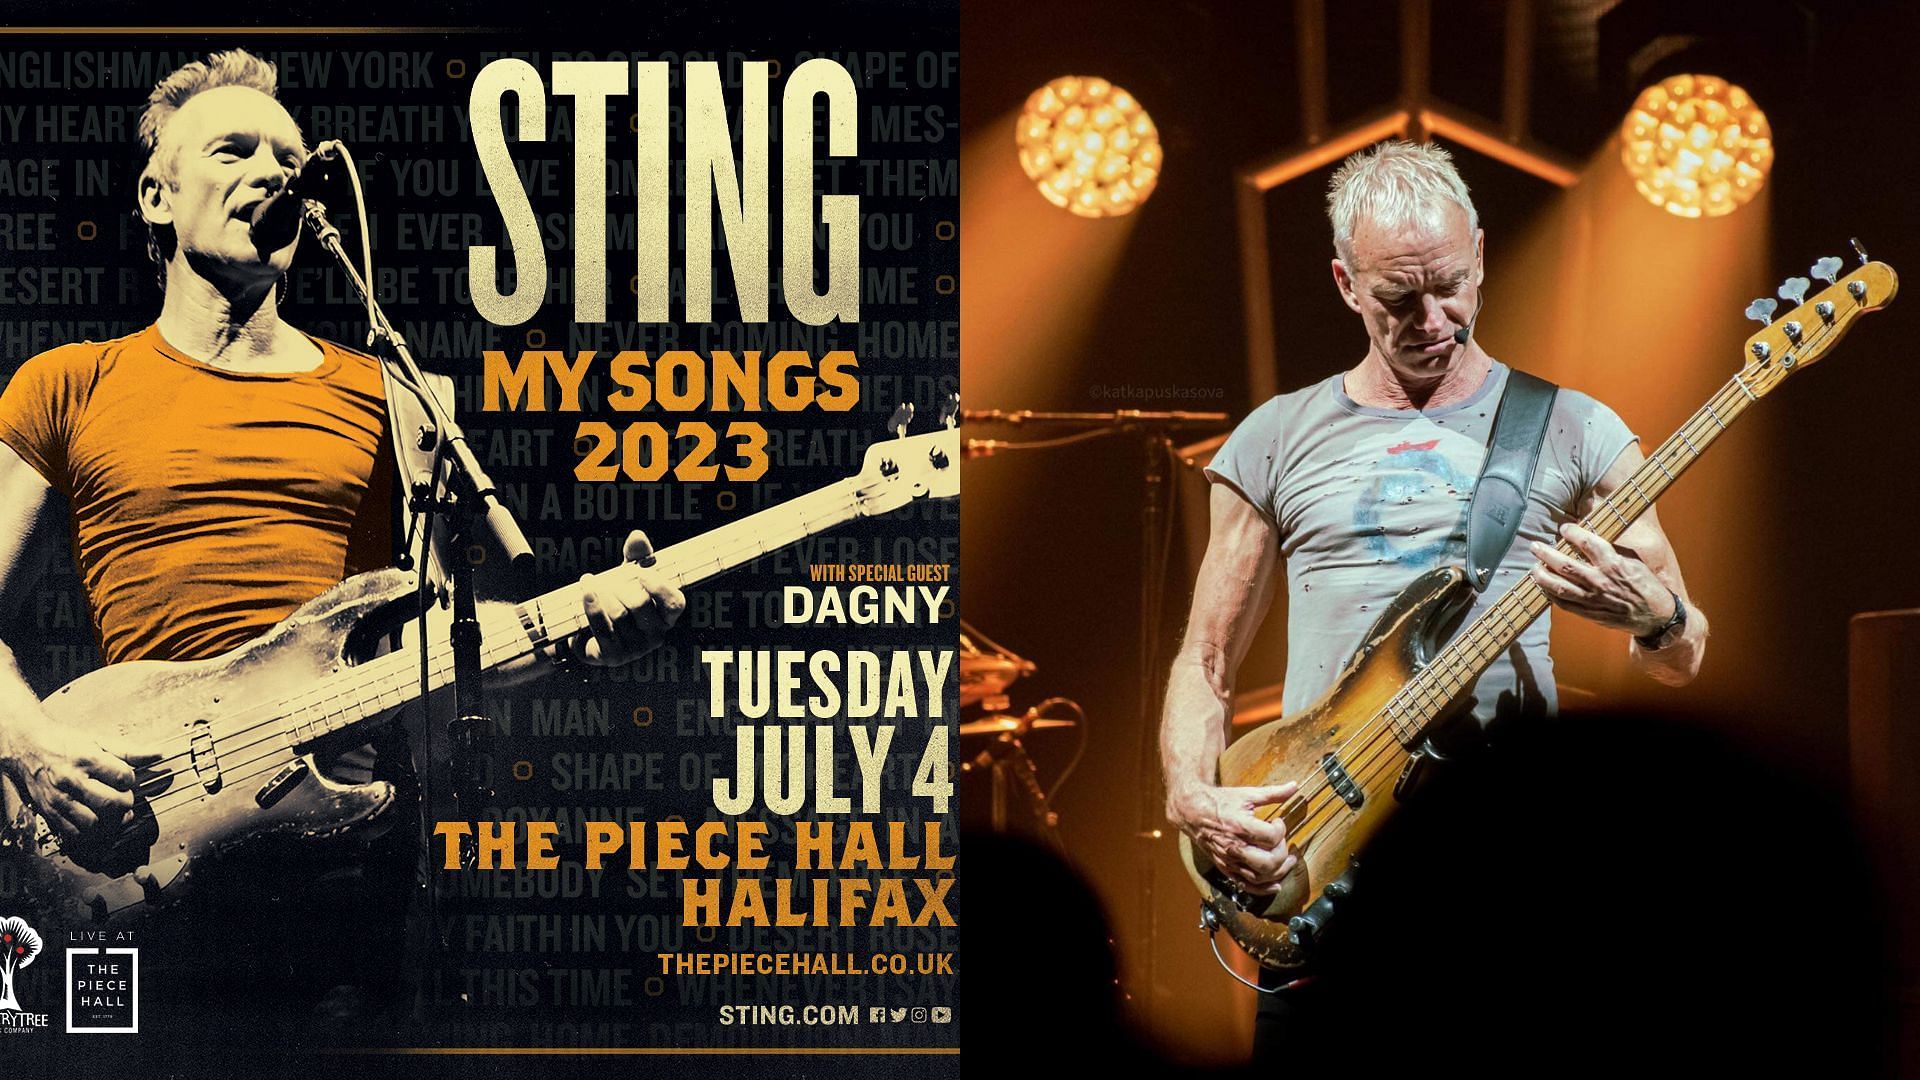 Sting My Songs UK Tour 2023 Tickets, where to buy, venues, dates, and more